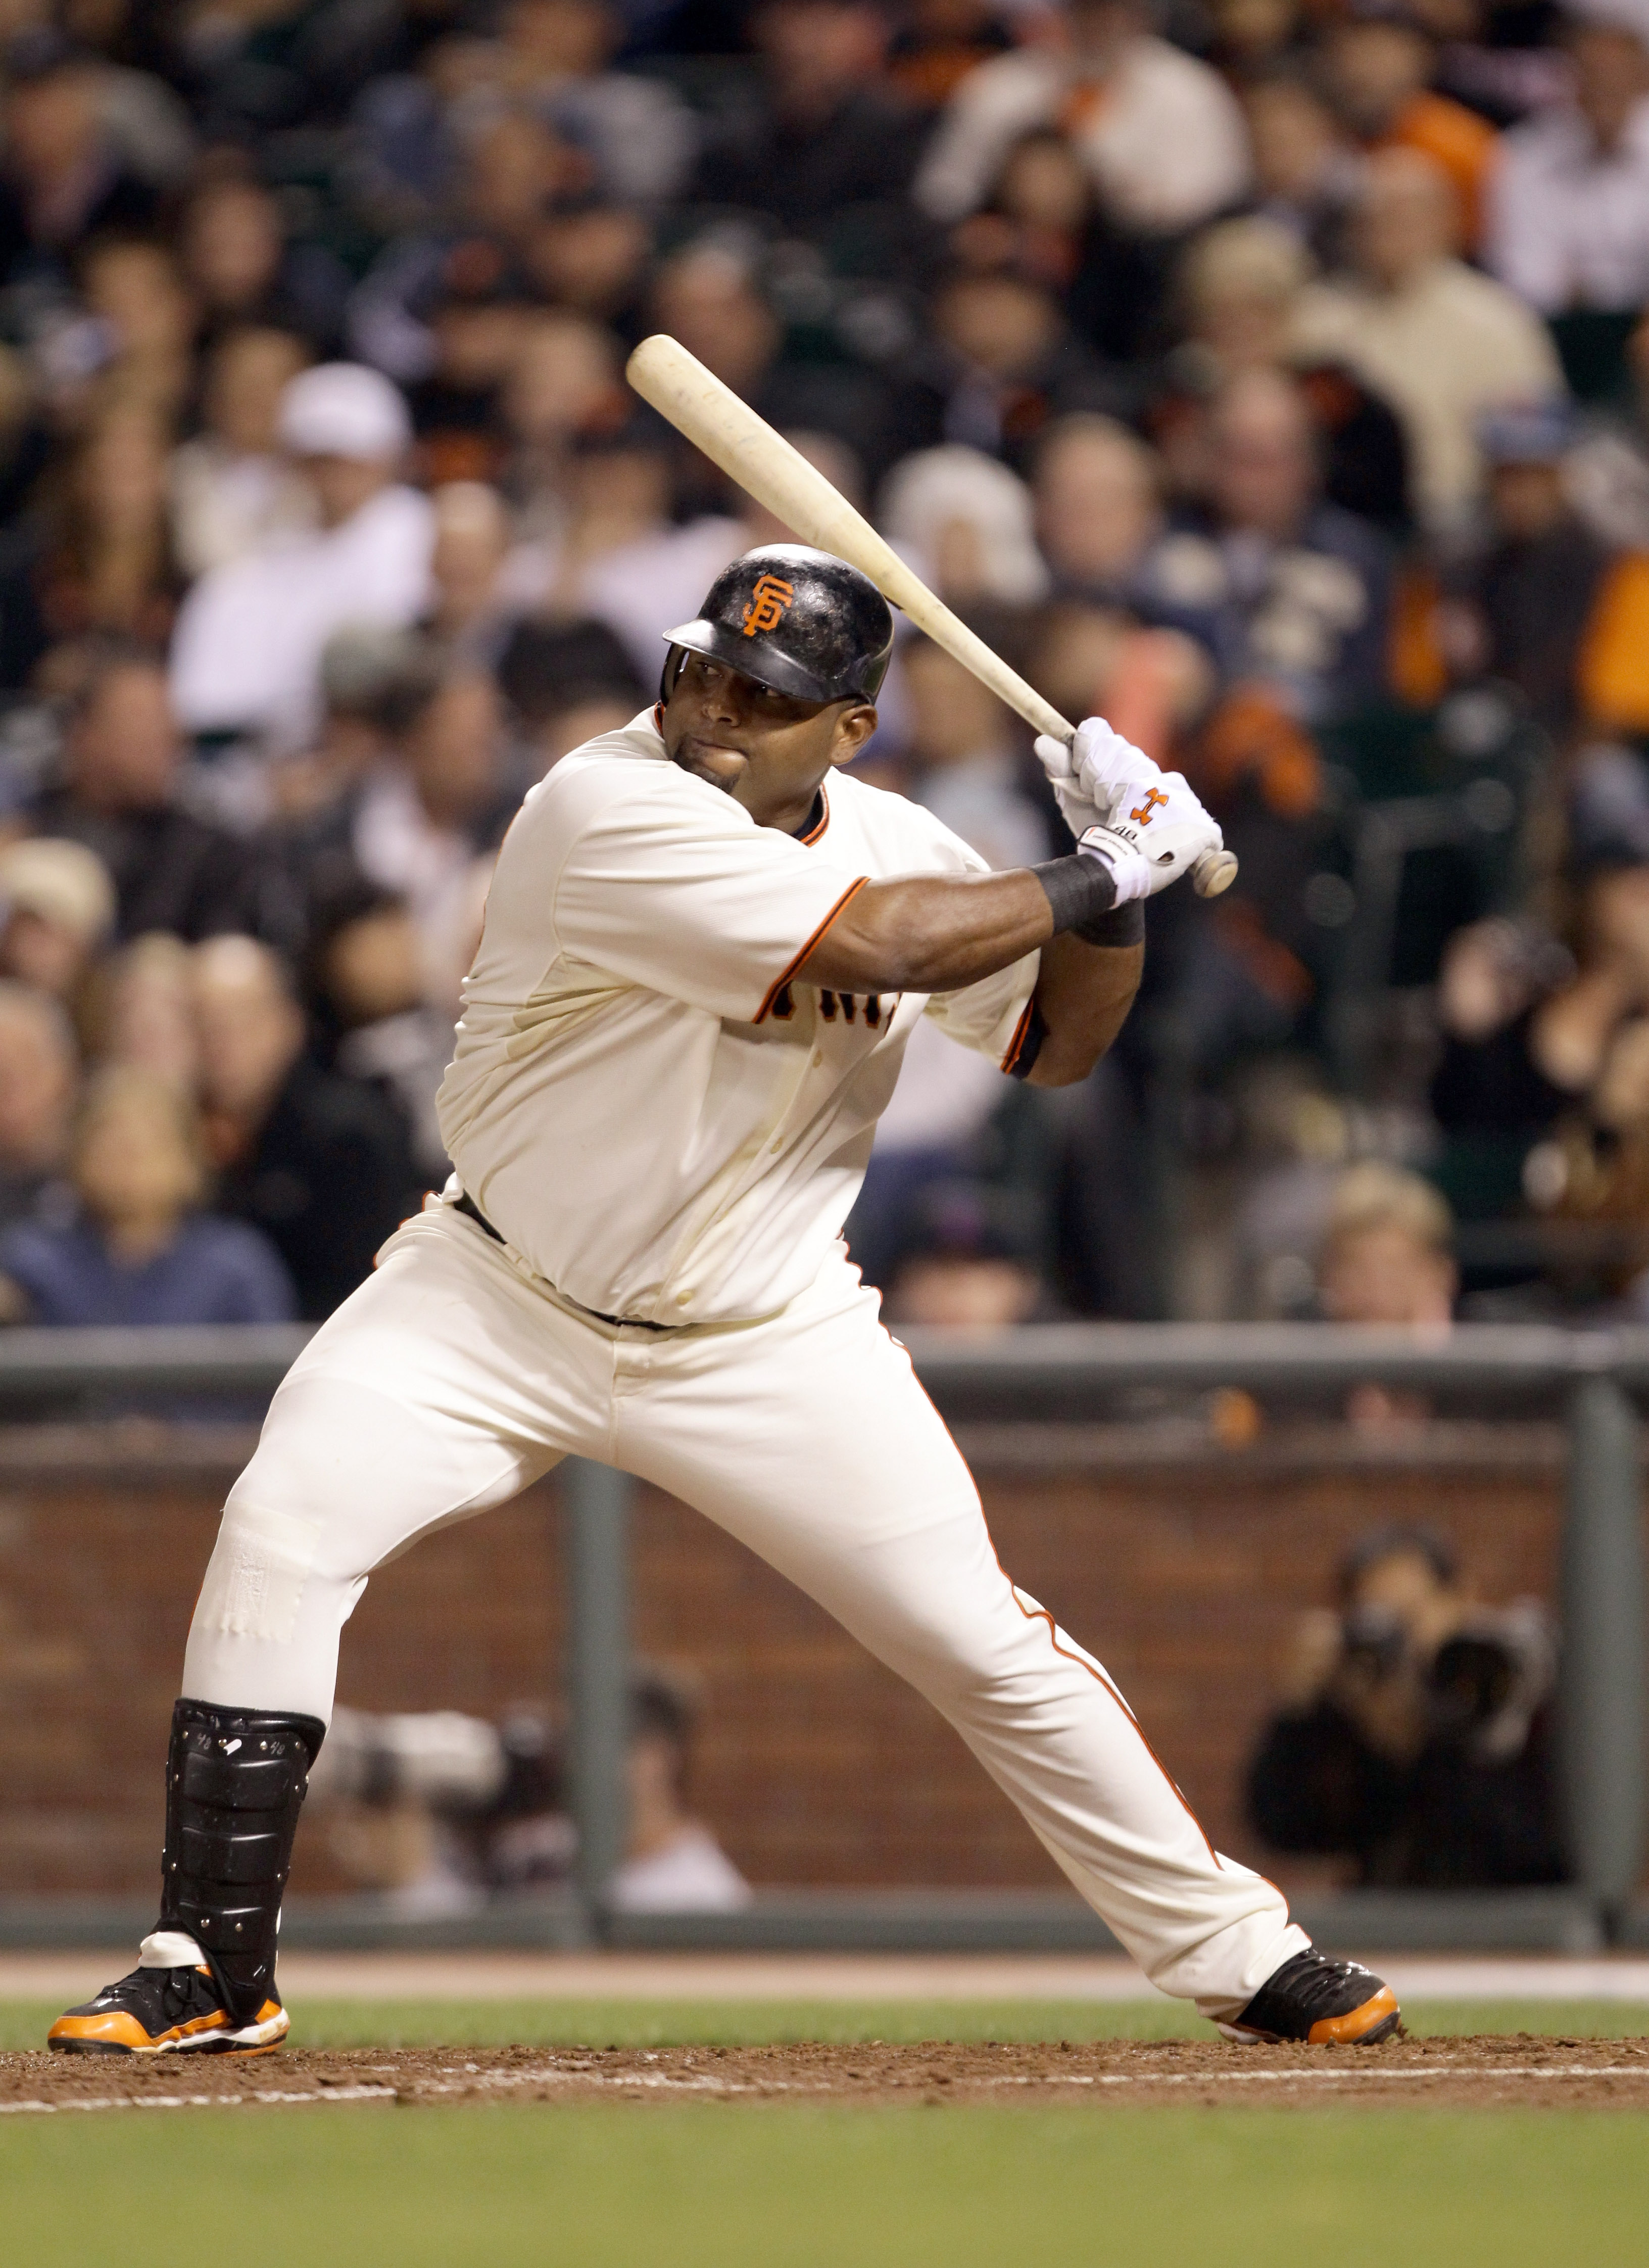 Pablo Sandoval breaks belt with mighty swing and miss